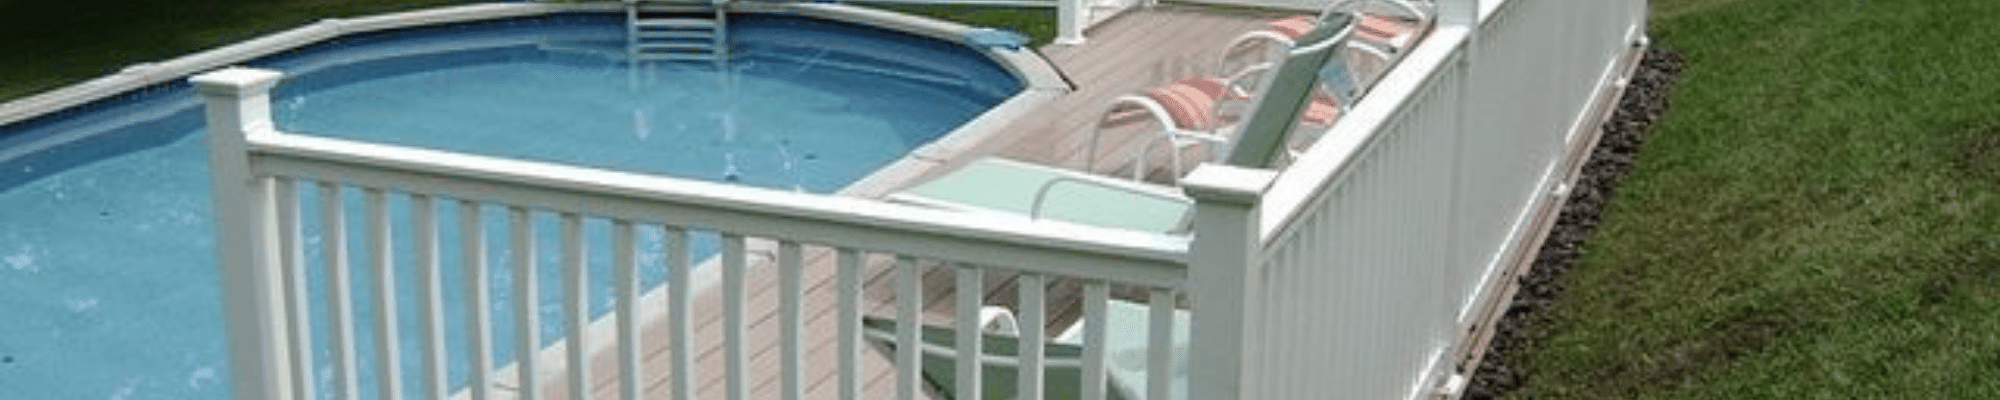 above ground pool fence white